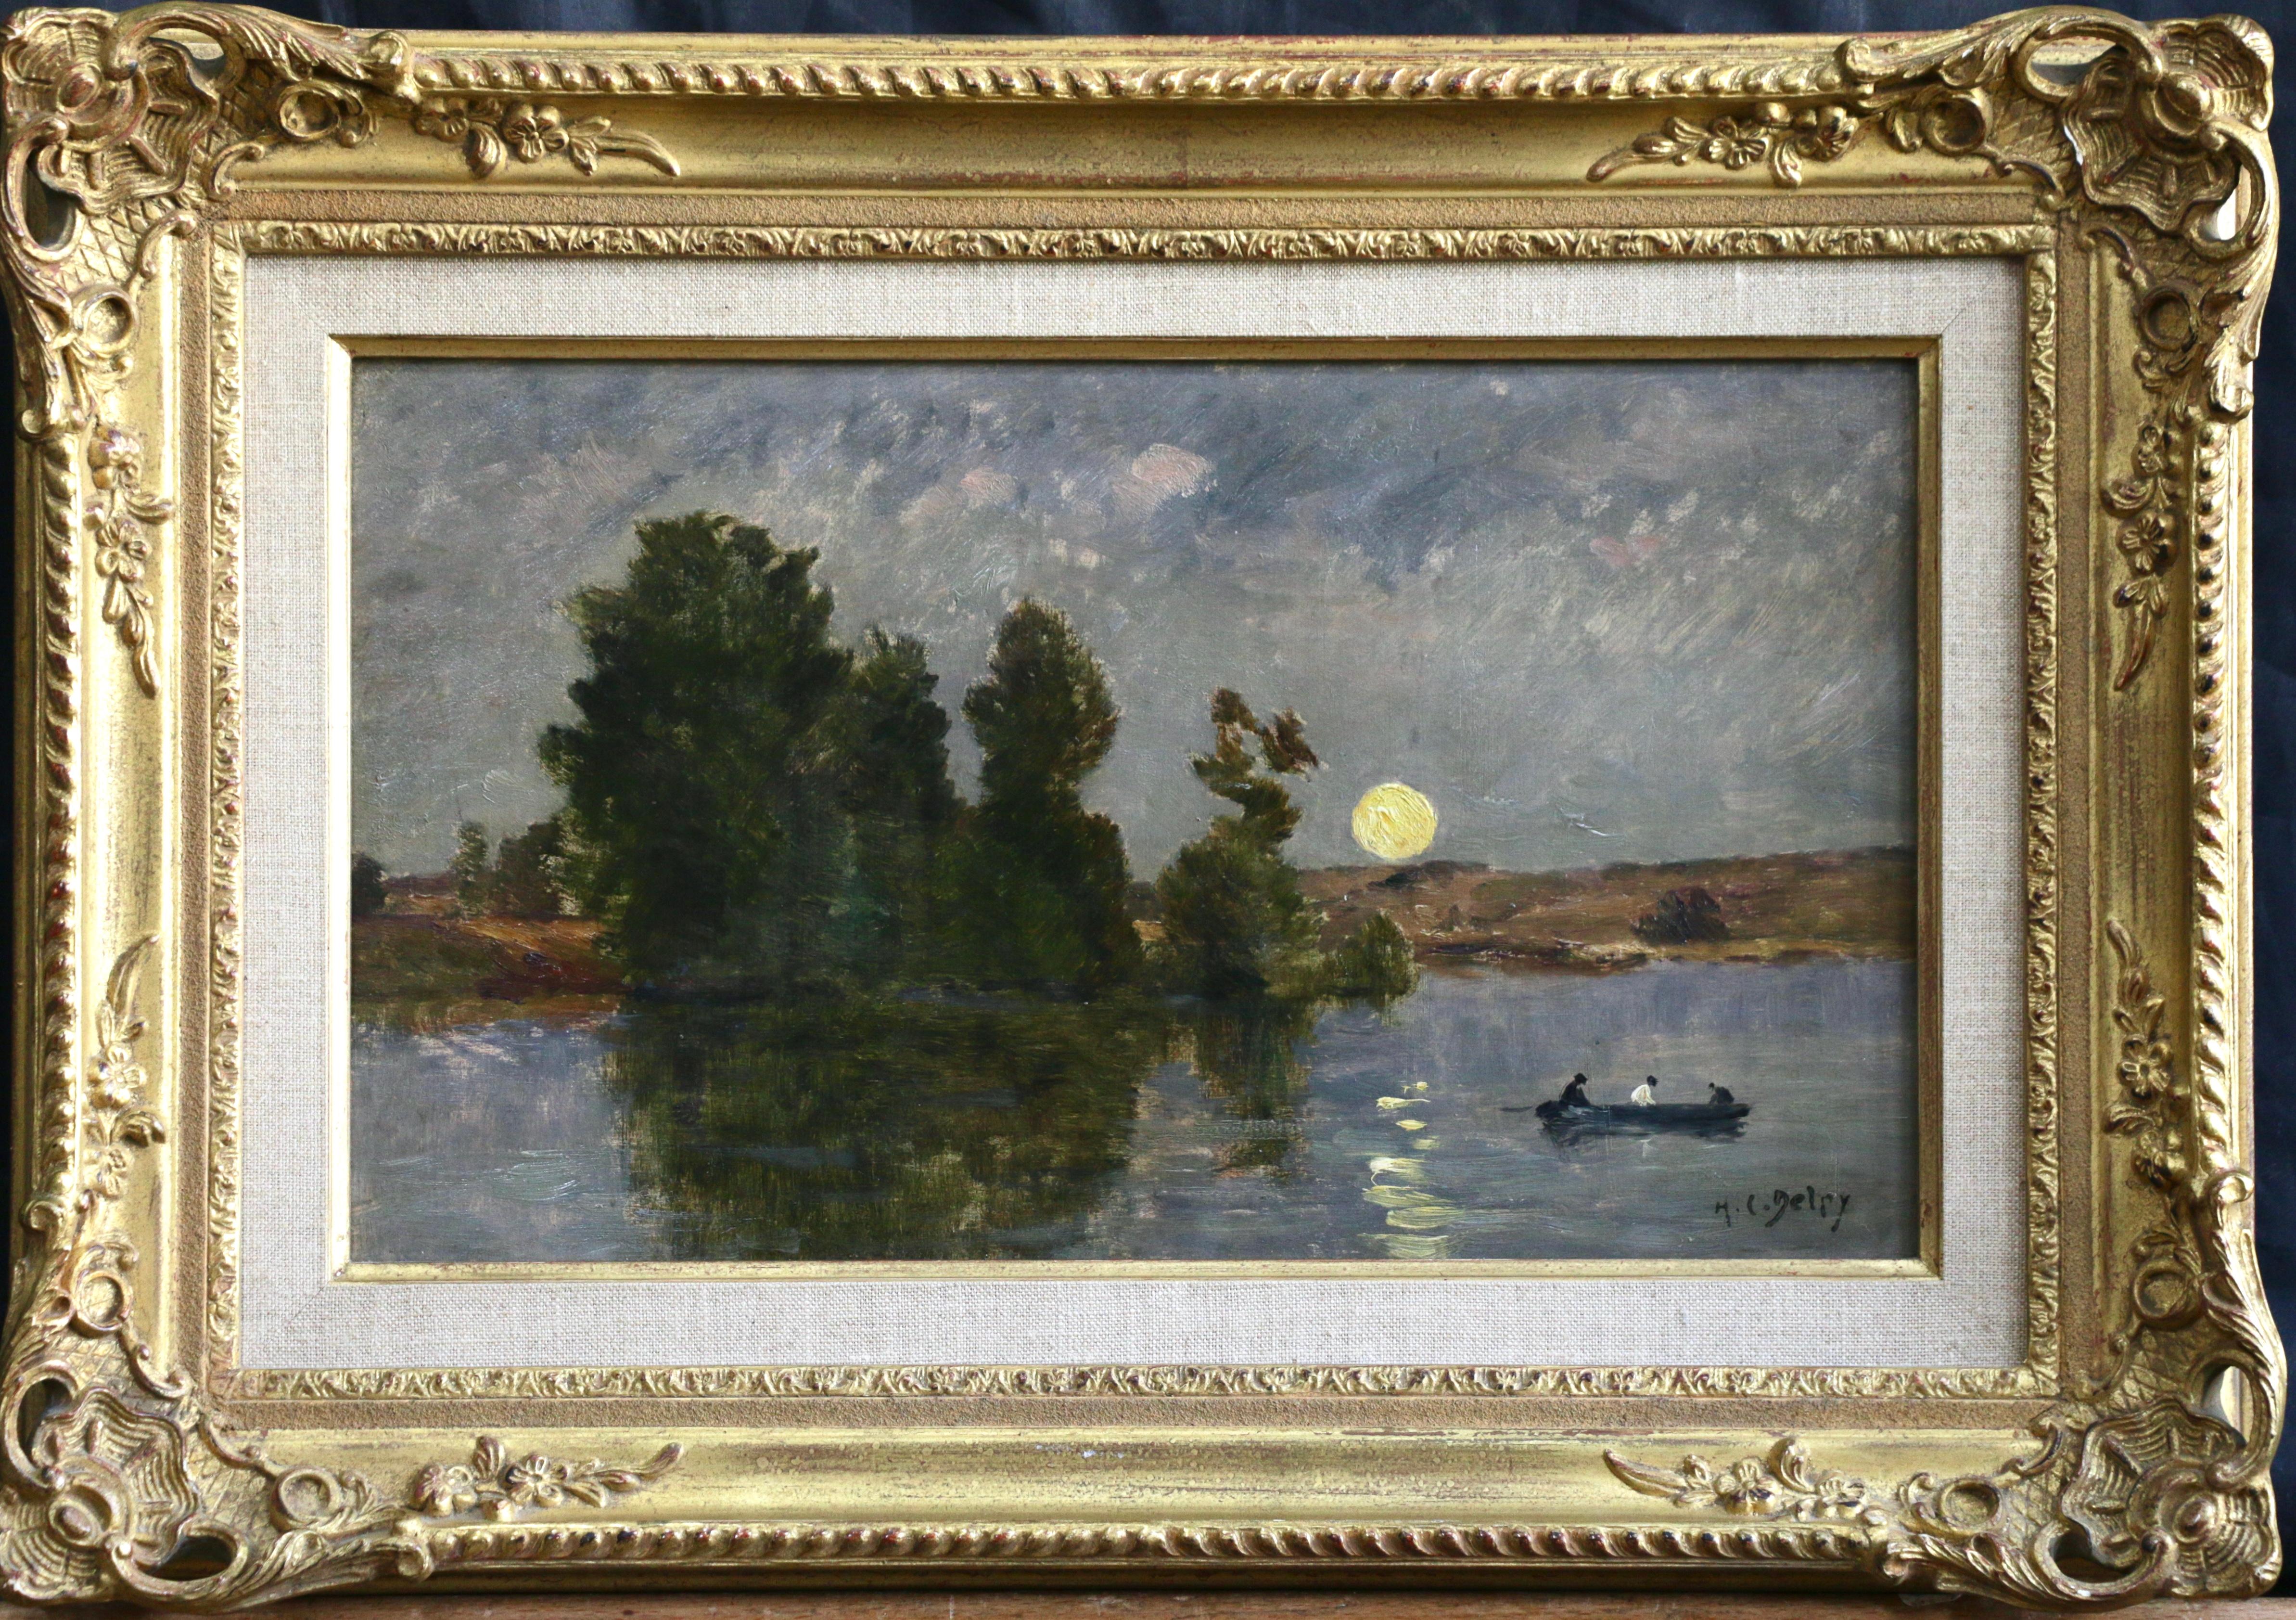 Moonlight on the River - Painting by Hippolyte Camille Delpy